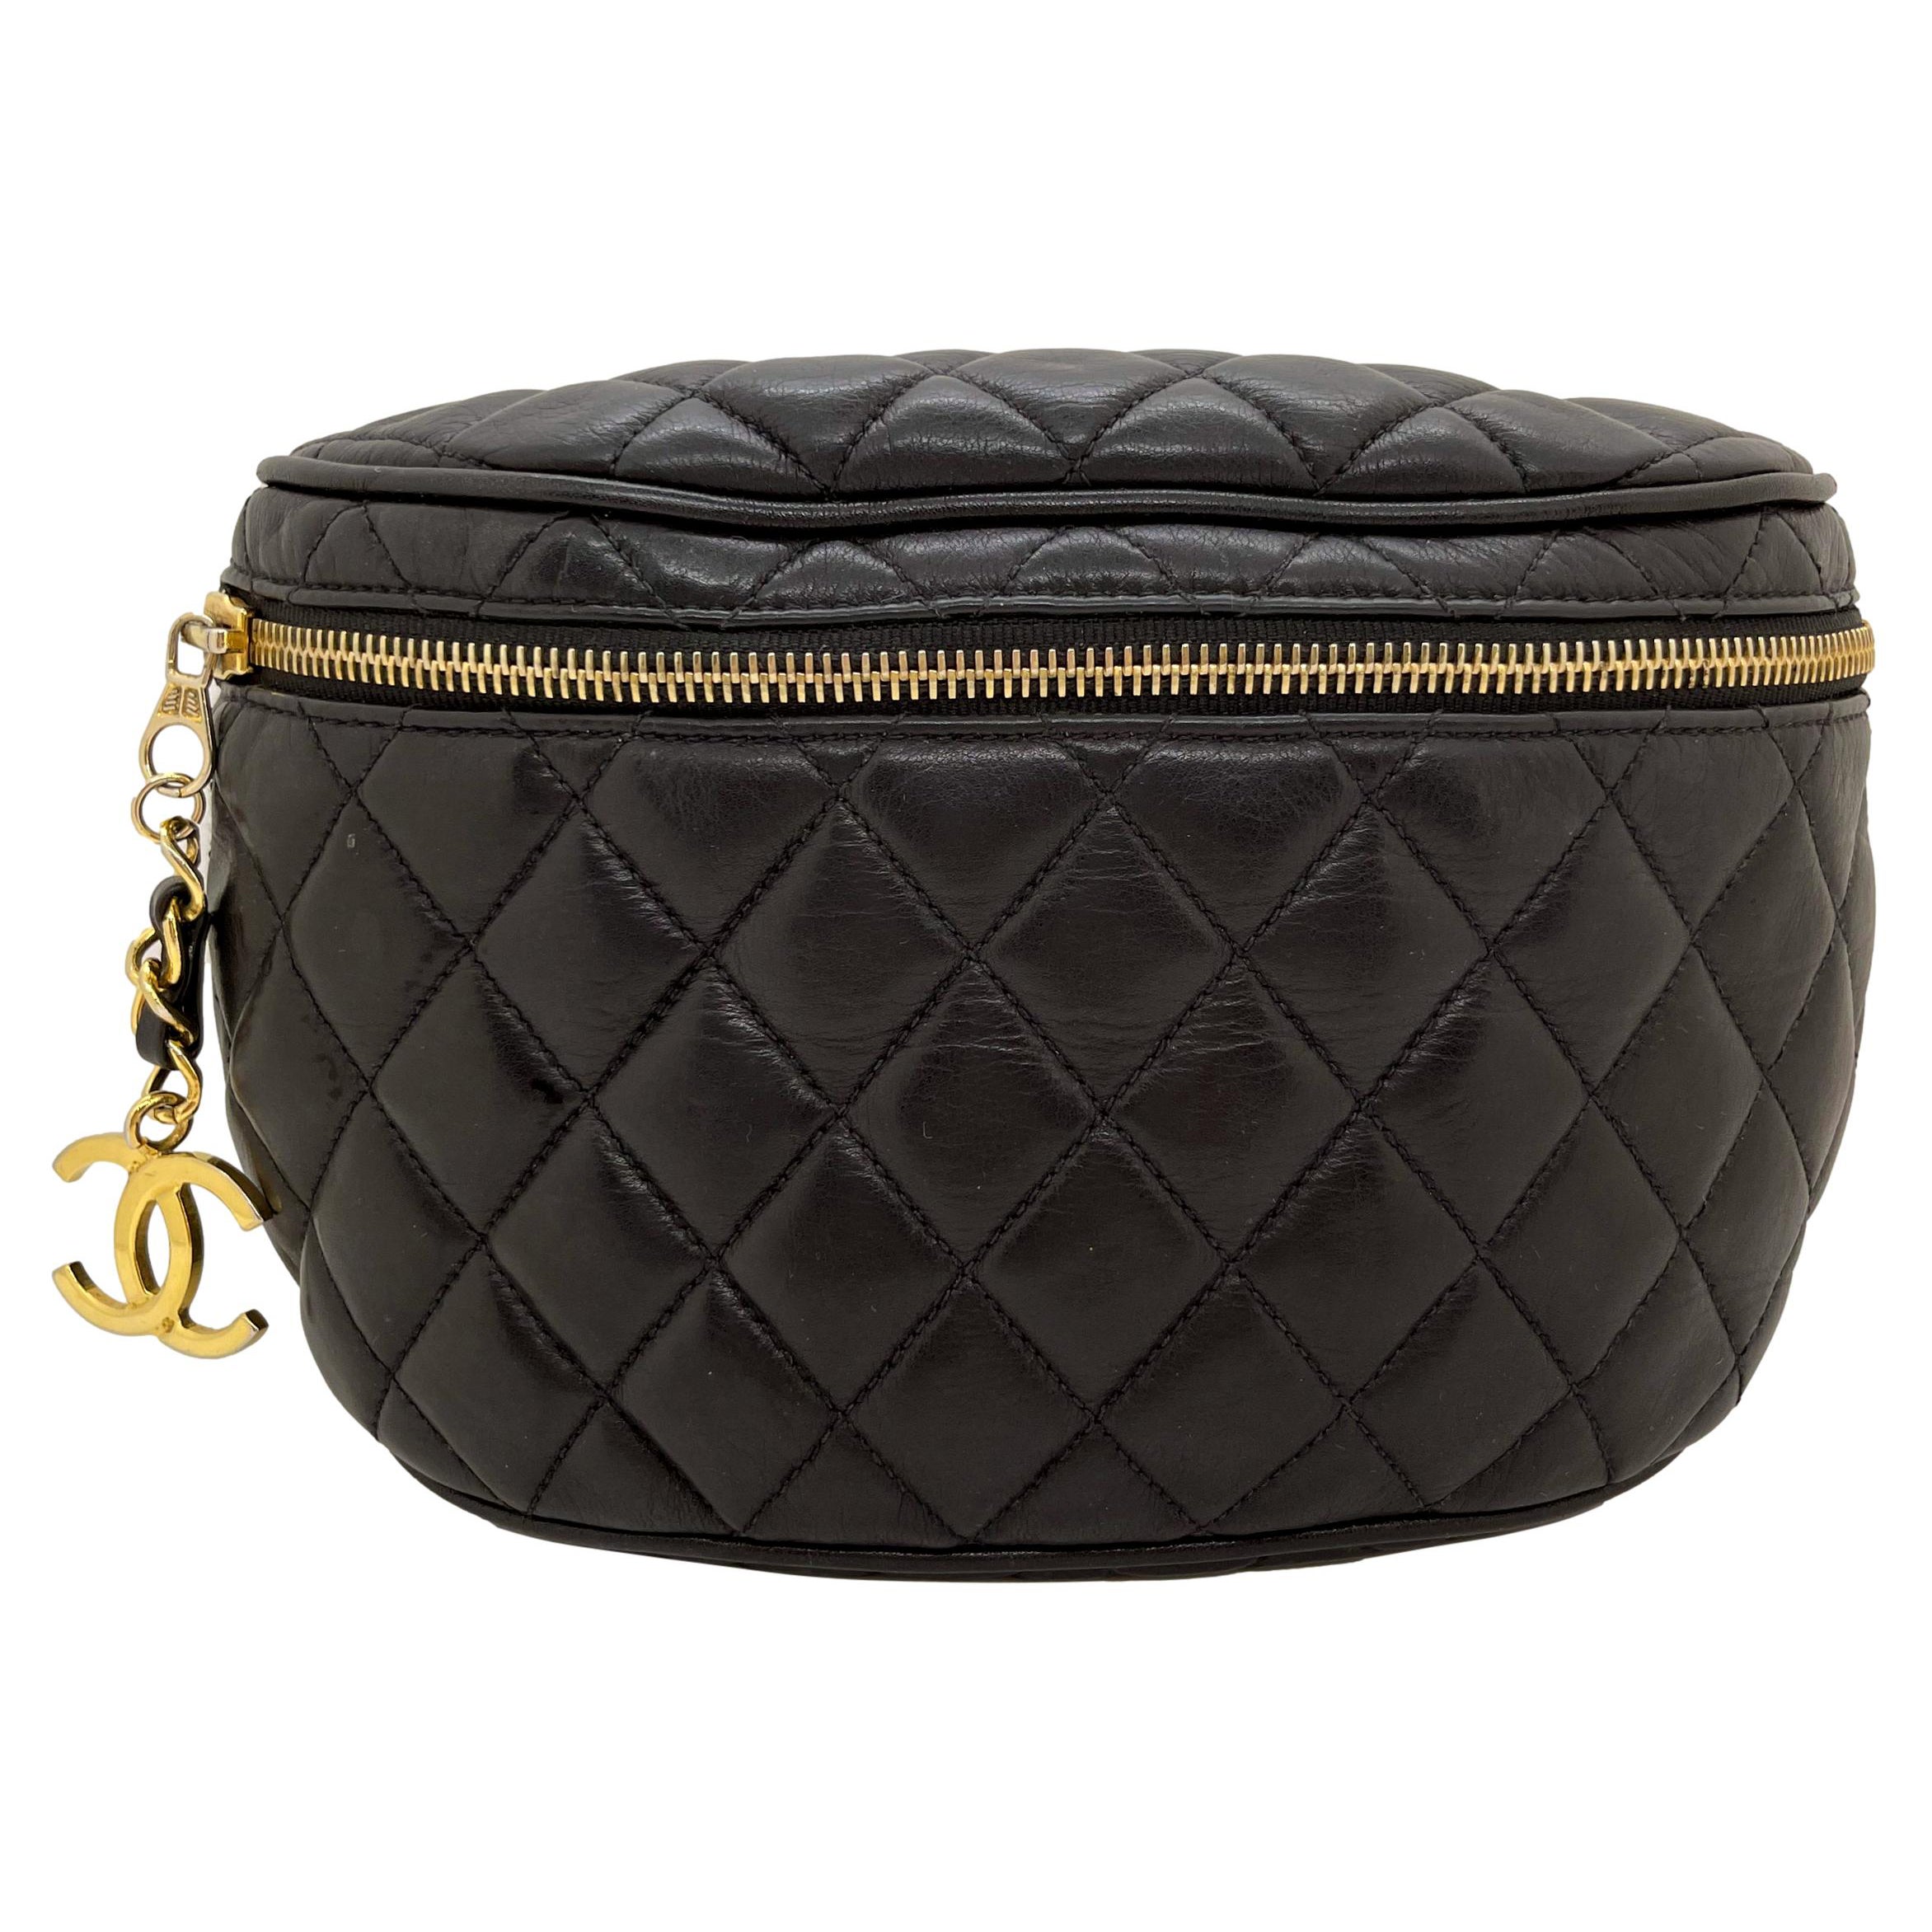 Chanel Quilted Lambskin Waist Belt Bum Bag with Gold Hardware, 1985.